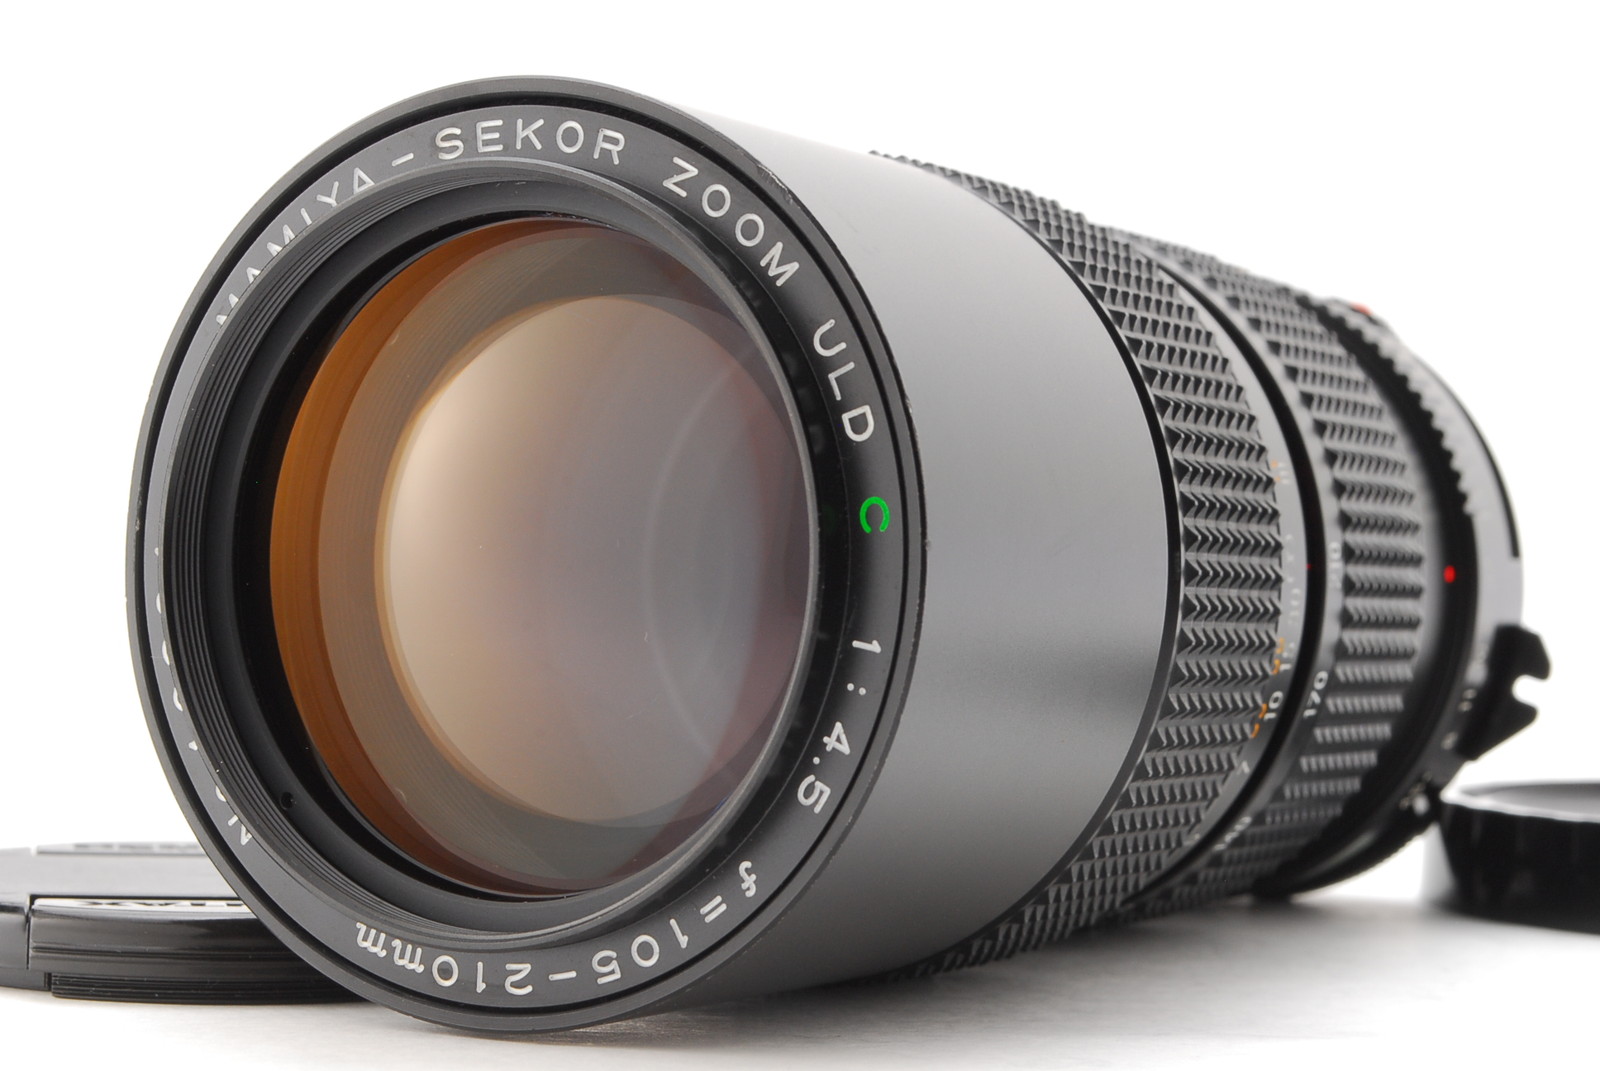 PROMOTION. EXC++++ Mamiya SEKOR ZOOM ULD C 105-210mm f/4.5, Front Cap, Rear Cap from Japan